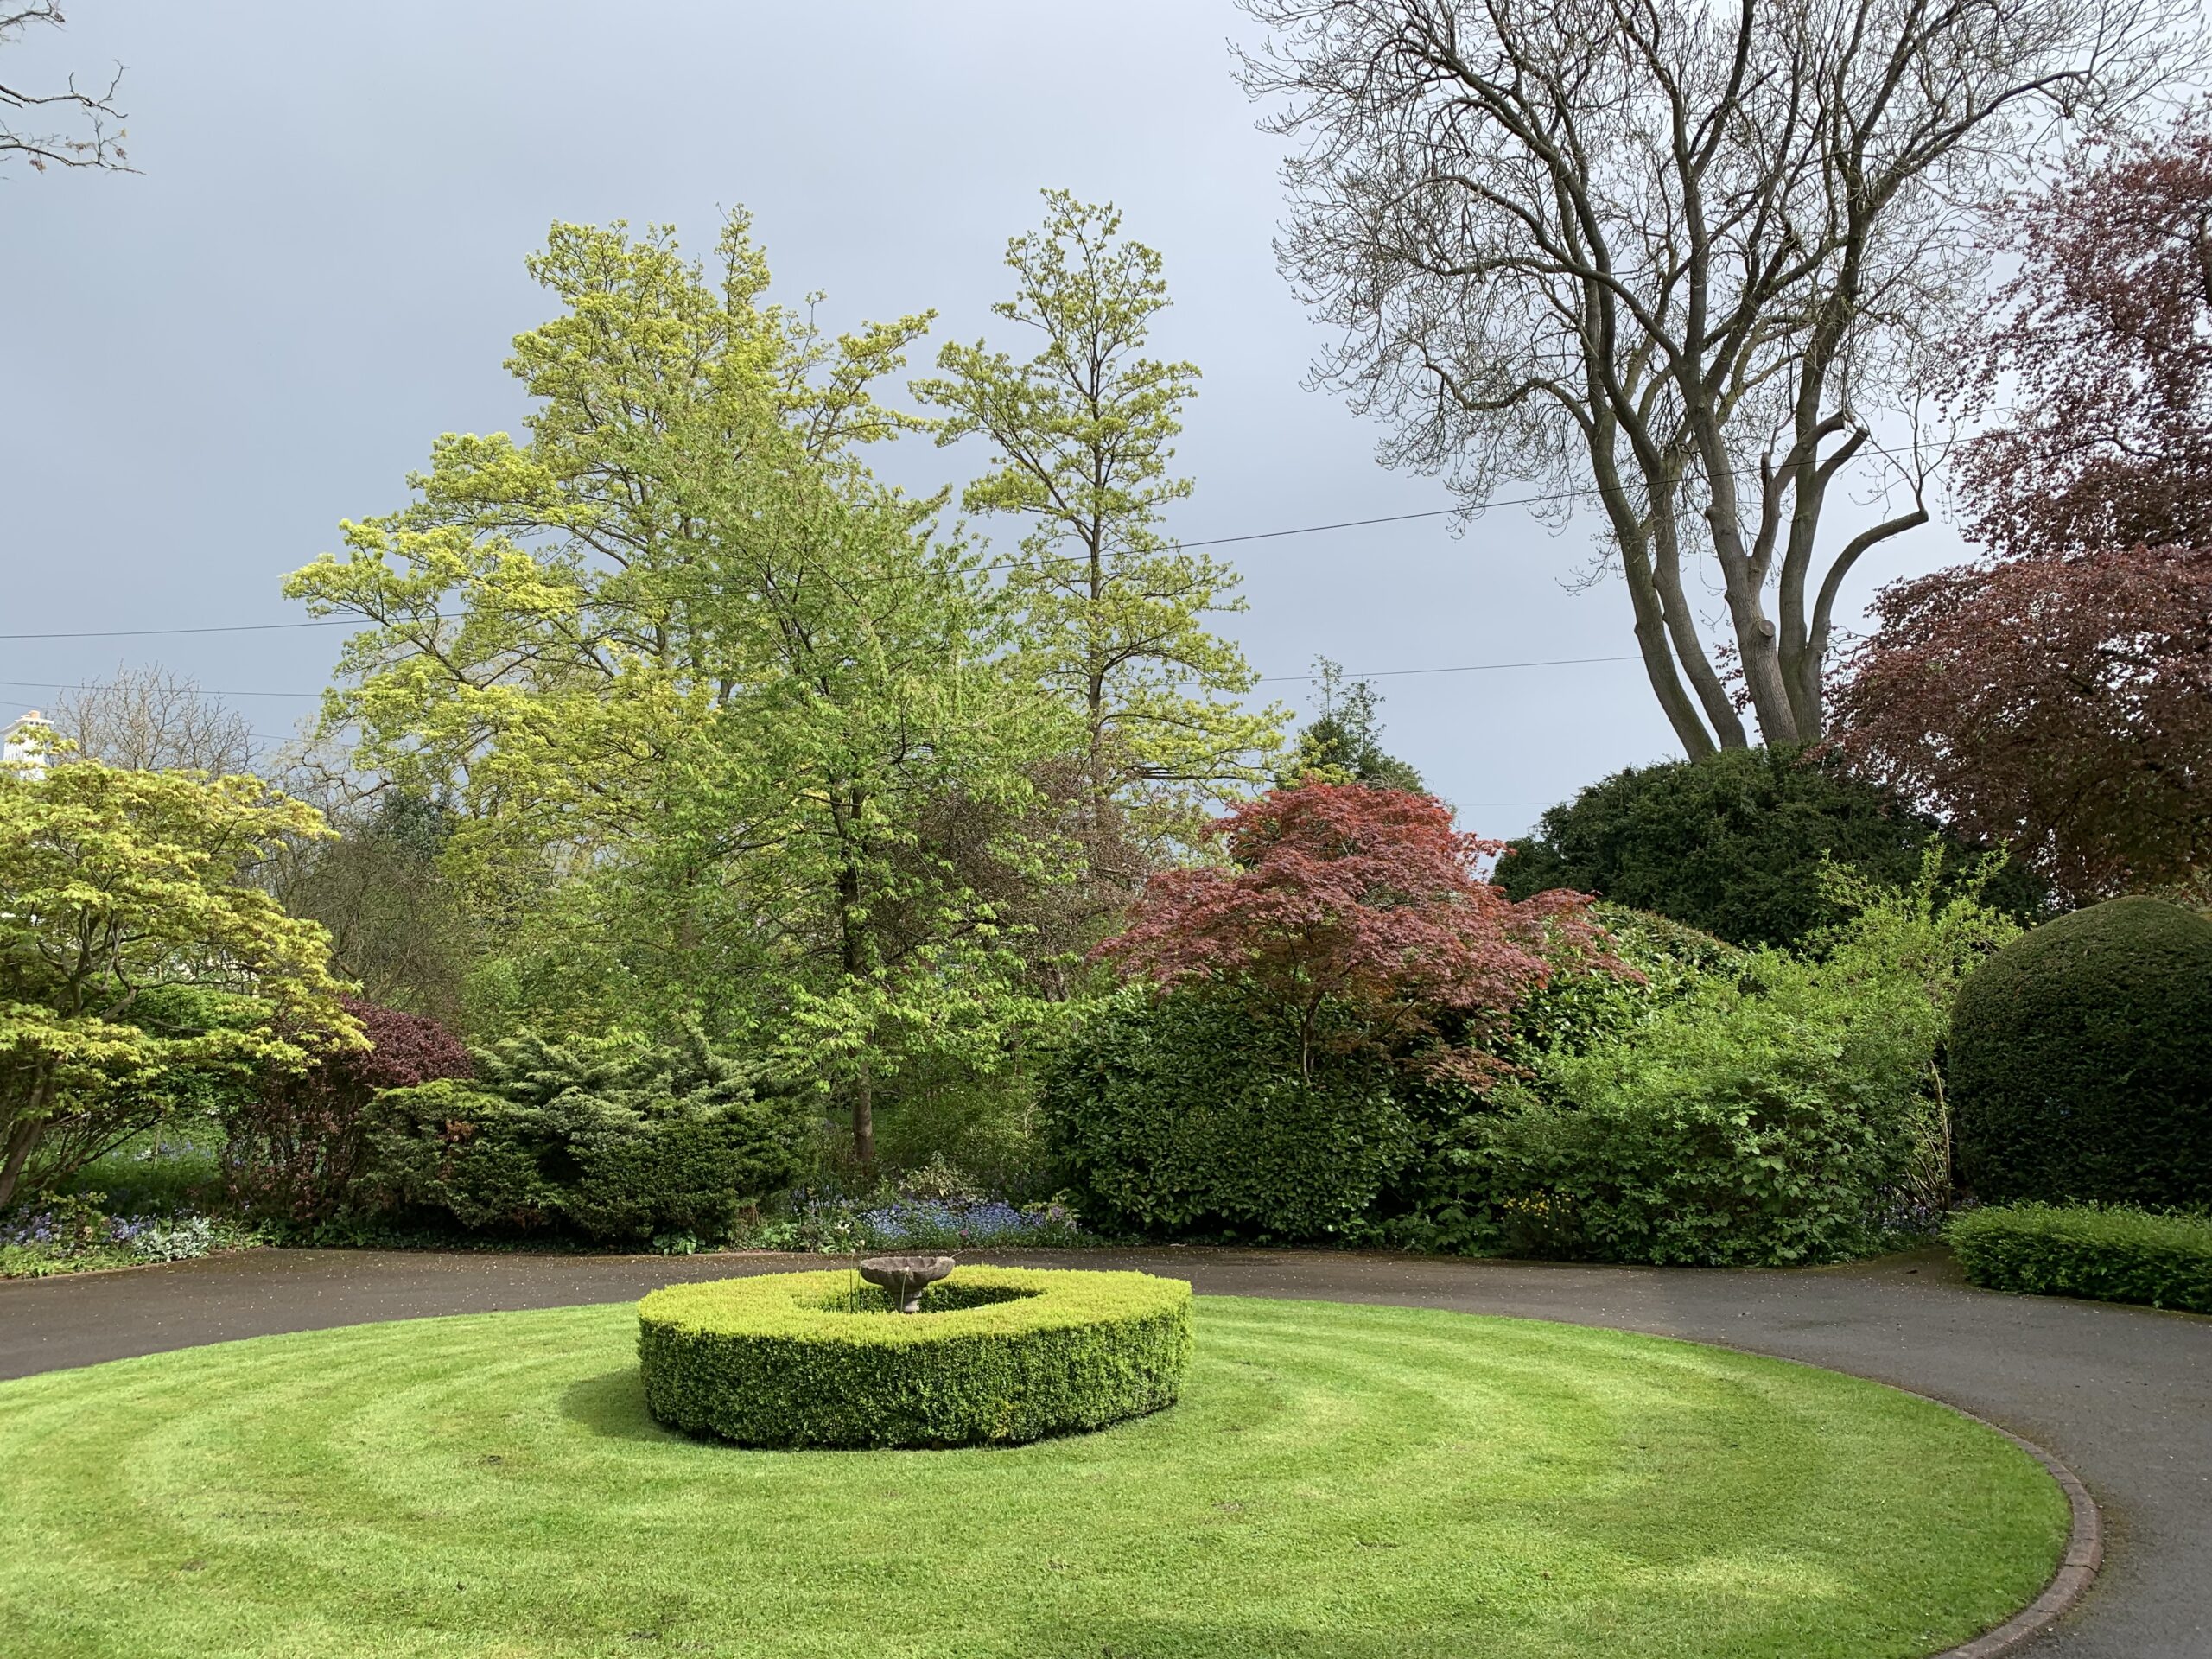 spring green trees and shrubs on a grey day